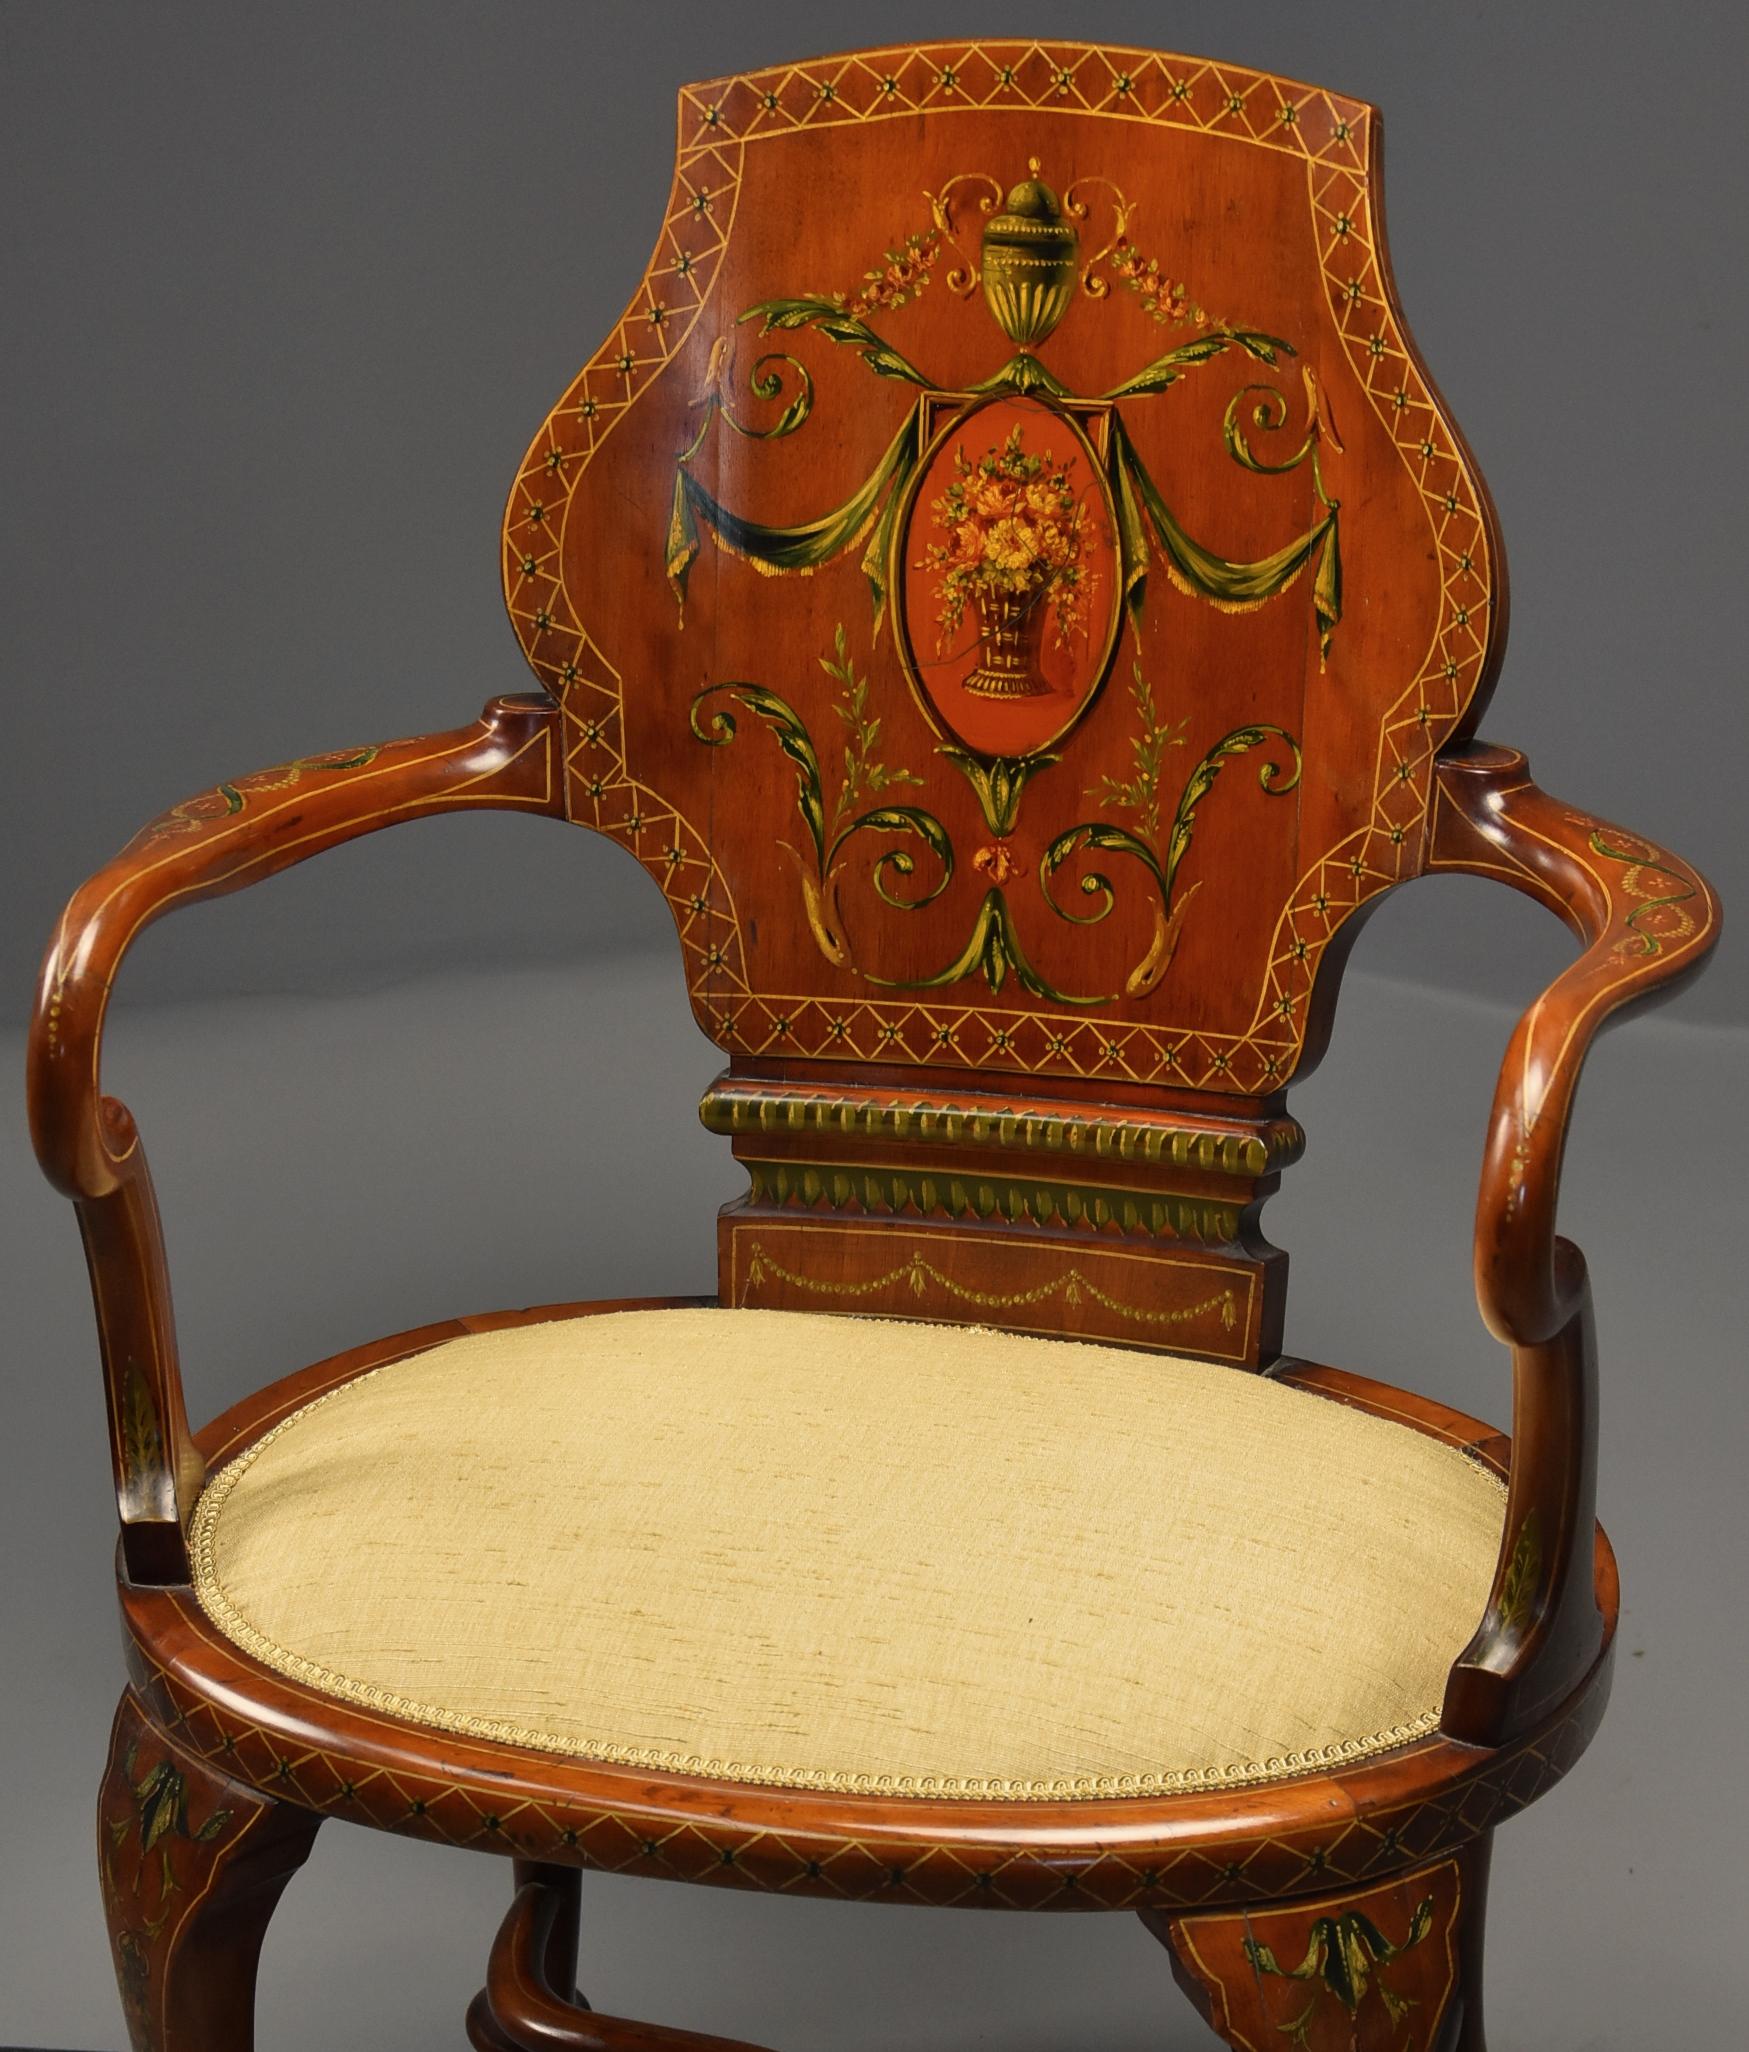 Highly Decorative Edwardian Satinwood and Painted Armchair in the Georgian Style im Zustand „Gut“ im Angebot in Suffolk, GB